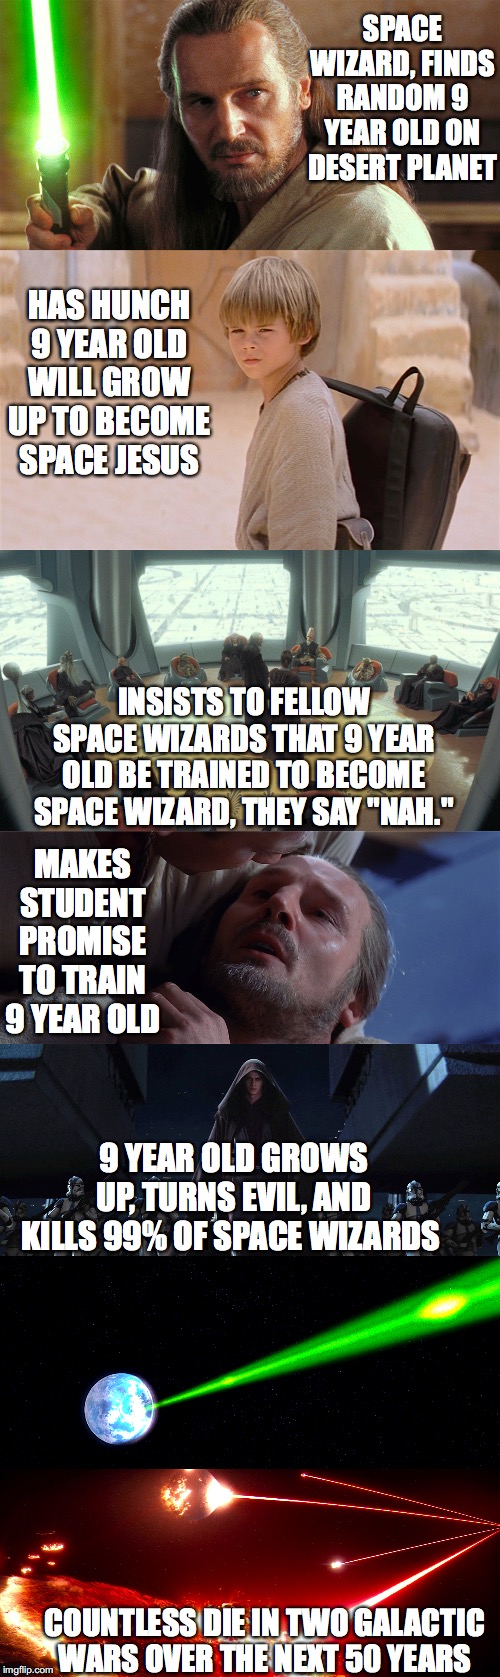 Qui-Gon Ruined Everything |  SPACE WIZARD, FINDS RANDOM 9 YEAR OLD ON DESERT PLANET; HAS HUNCH 9 YEAR OLD WILL GROW UP TO BECOME SPACE JESUS; INSISTS TO FELLOW SPACE WIZARDS THAT 9 YEAR OLD BE TRAINED TO BECOME SPACE WIZARD, THEY SAY "NAH."; MAKES STUDENT PROMISE TO TRAIN 9 YEAR OLD; 9 YEAR OLD GROWS UP, TURNS EVIL, AND KILLS 99% OF SPACE WIZARDS; COUNTLESS DIE IN TWO GALACTIC WARS OVER THE NEXT 50 YEARS | image tagged in star wars,anakin skywalker,jedi,order 66,the force | made w/ Imgflip meme maker